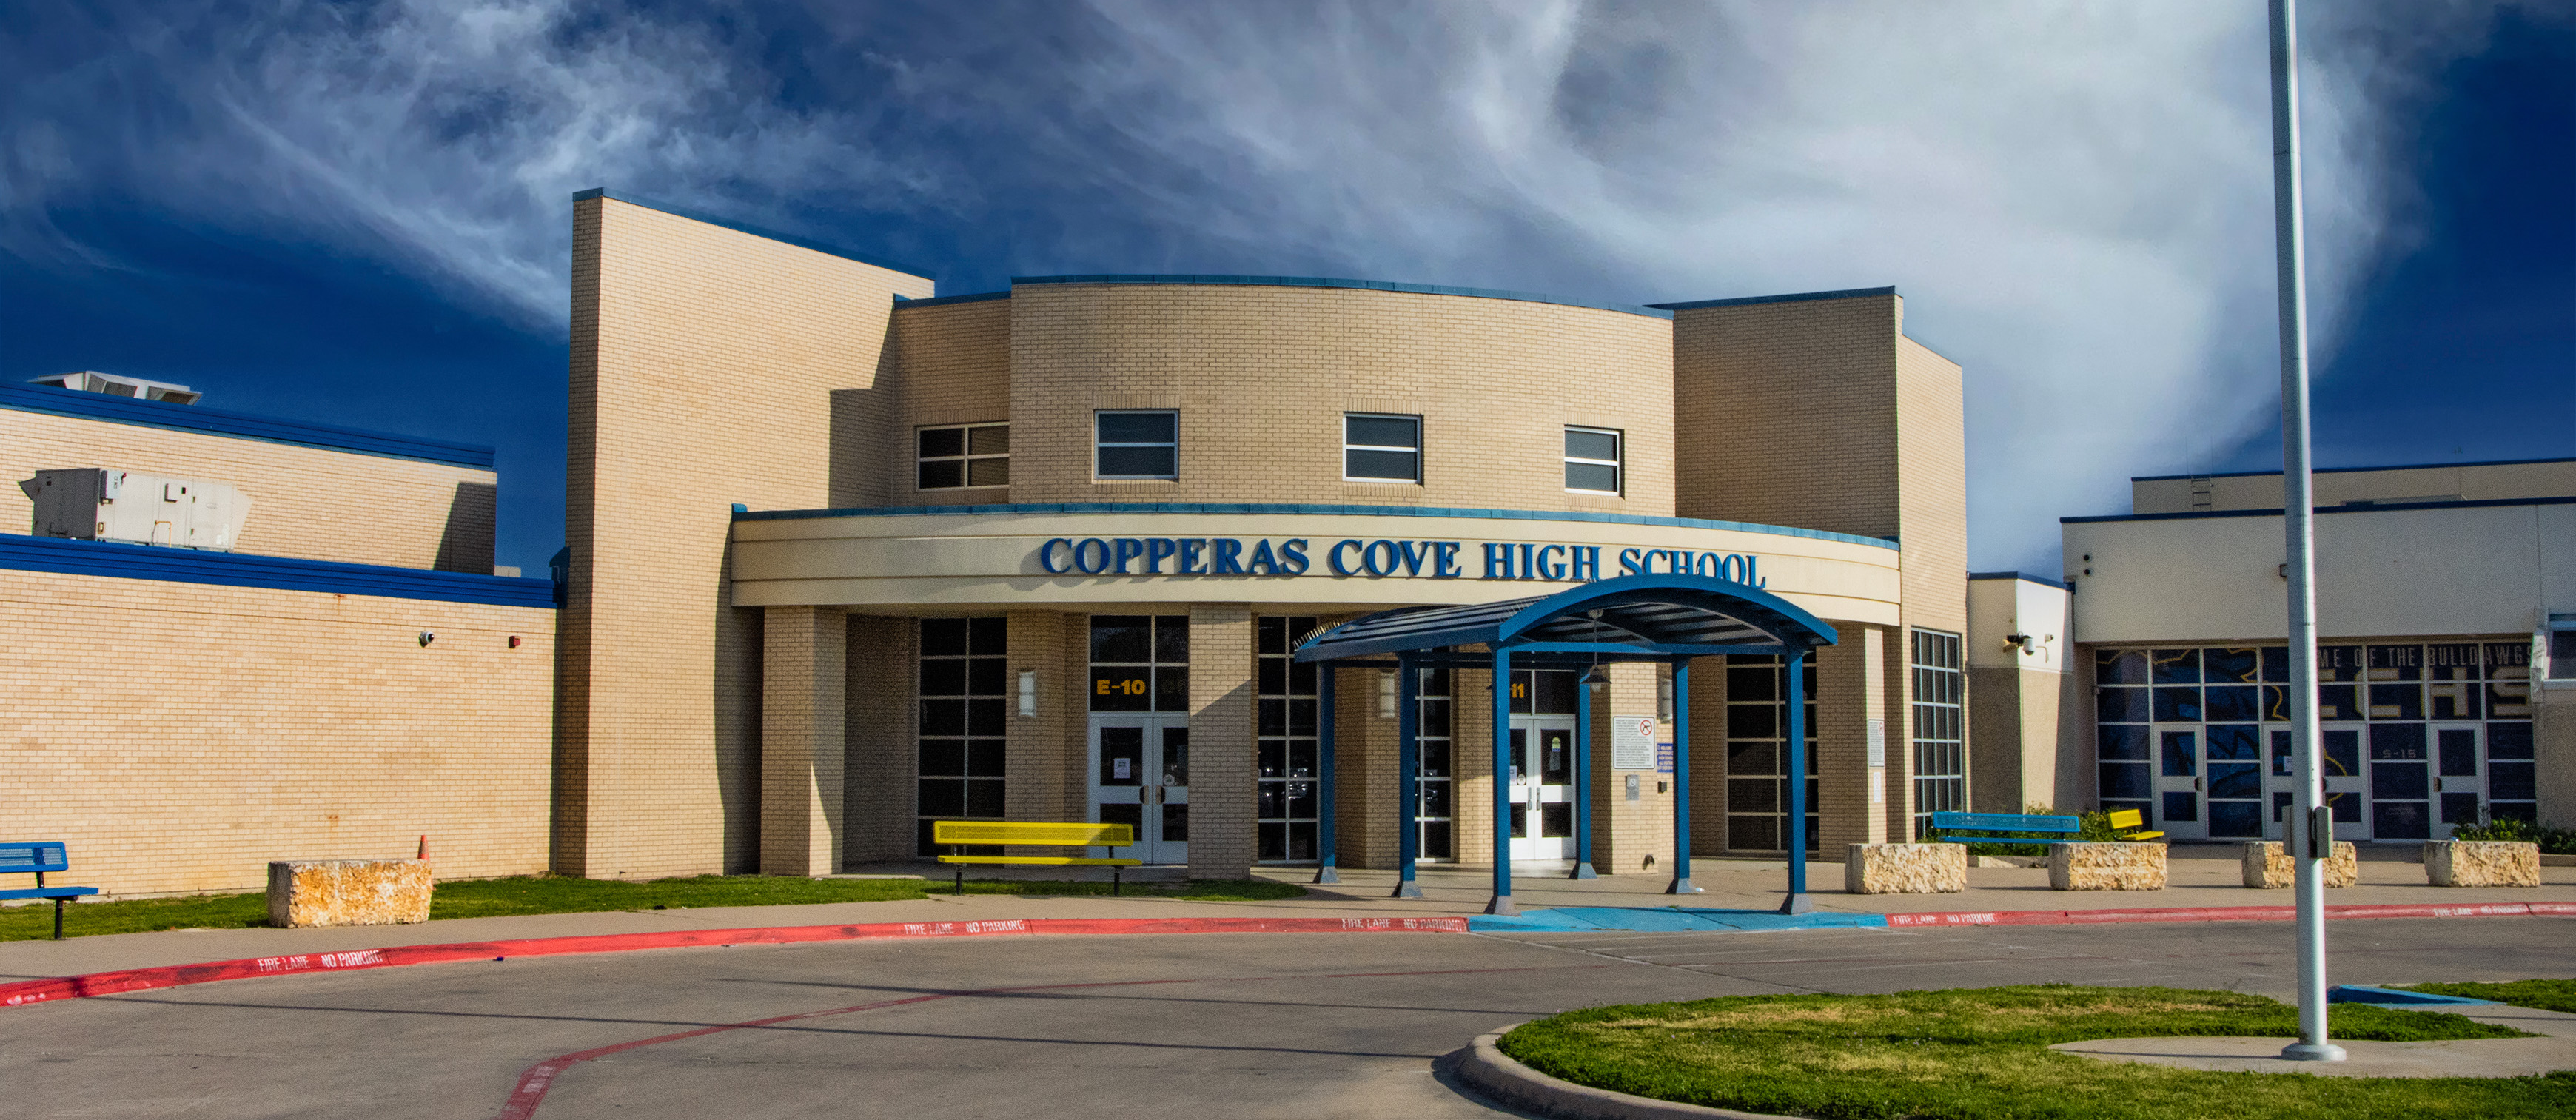 Welcome to Copperas Cove High School!